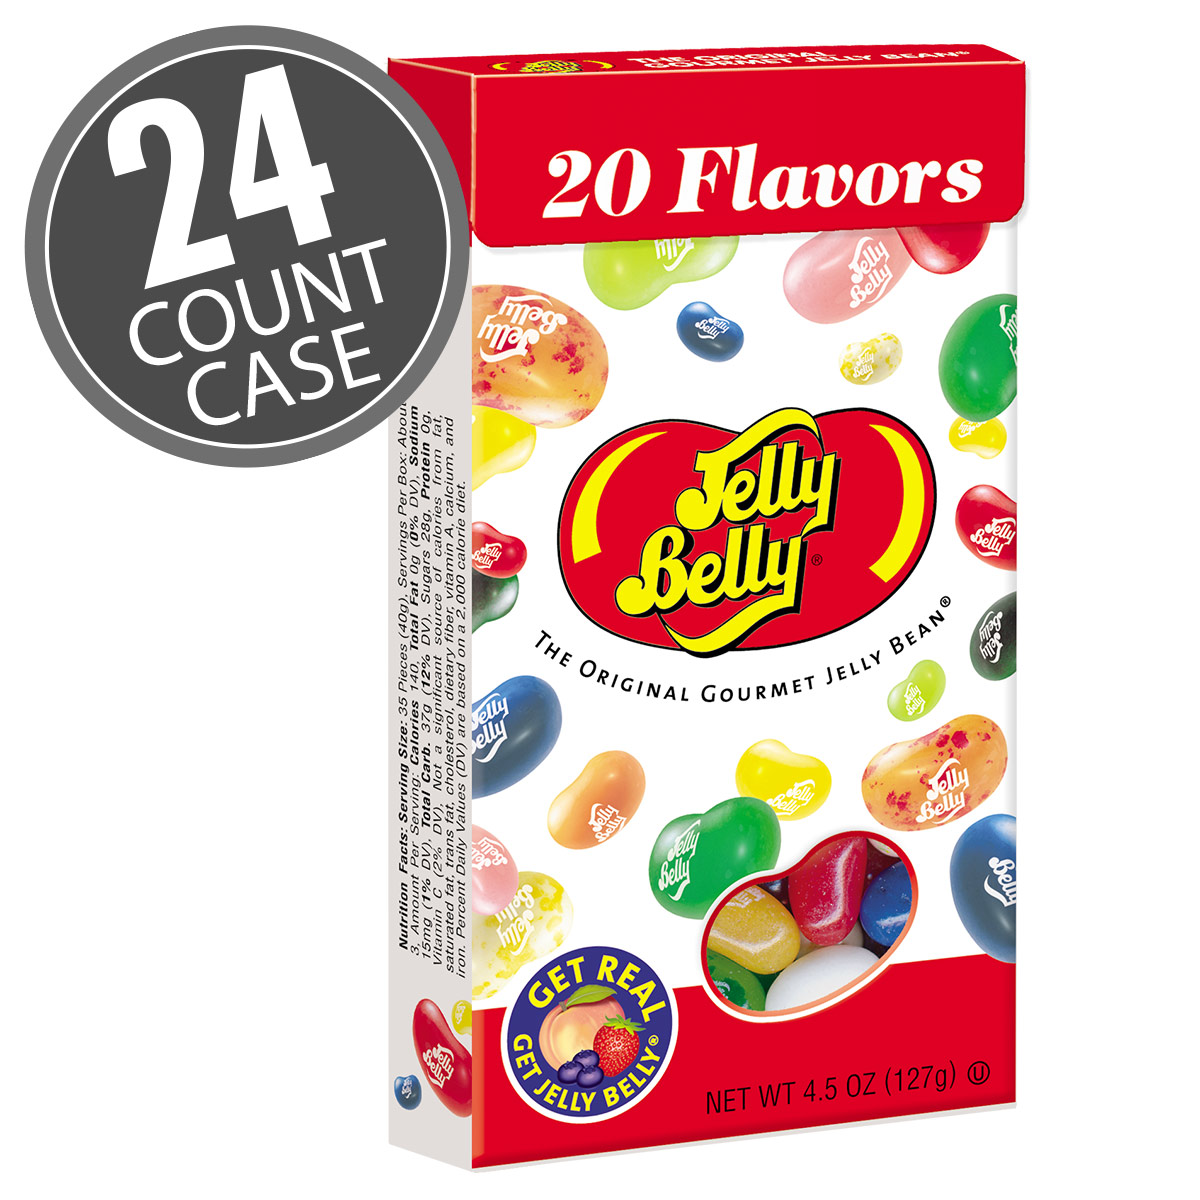 Jelly Belly jelly beans in 20 Assorted Flavors in 4.5 oz; re-closeable flip-top boxes. Great candy for a party or giveaways.